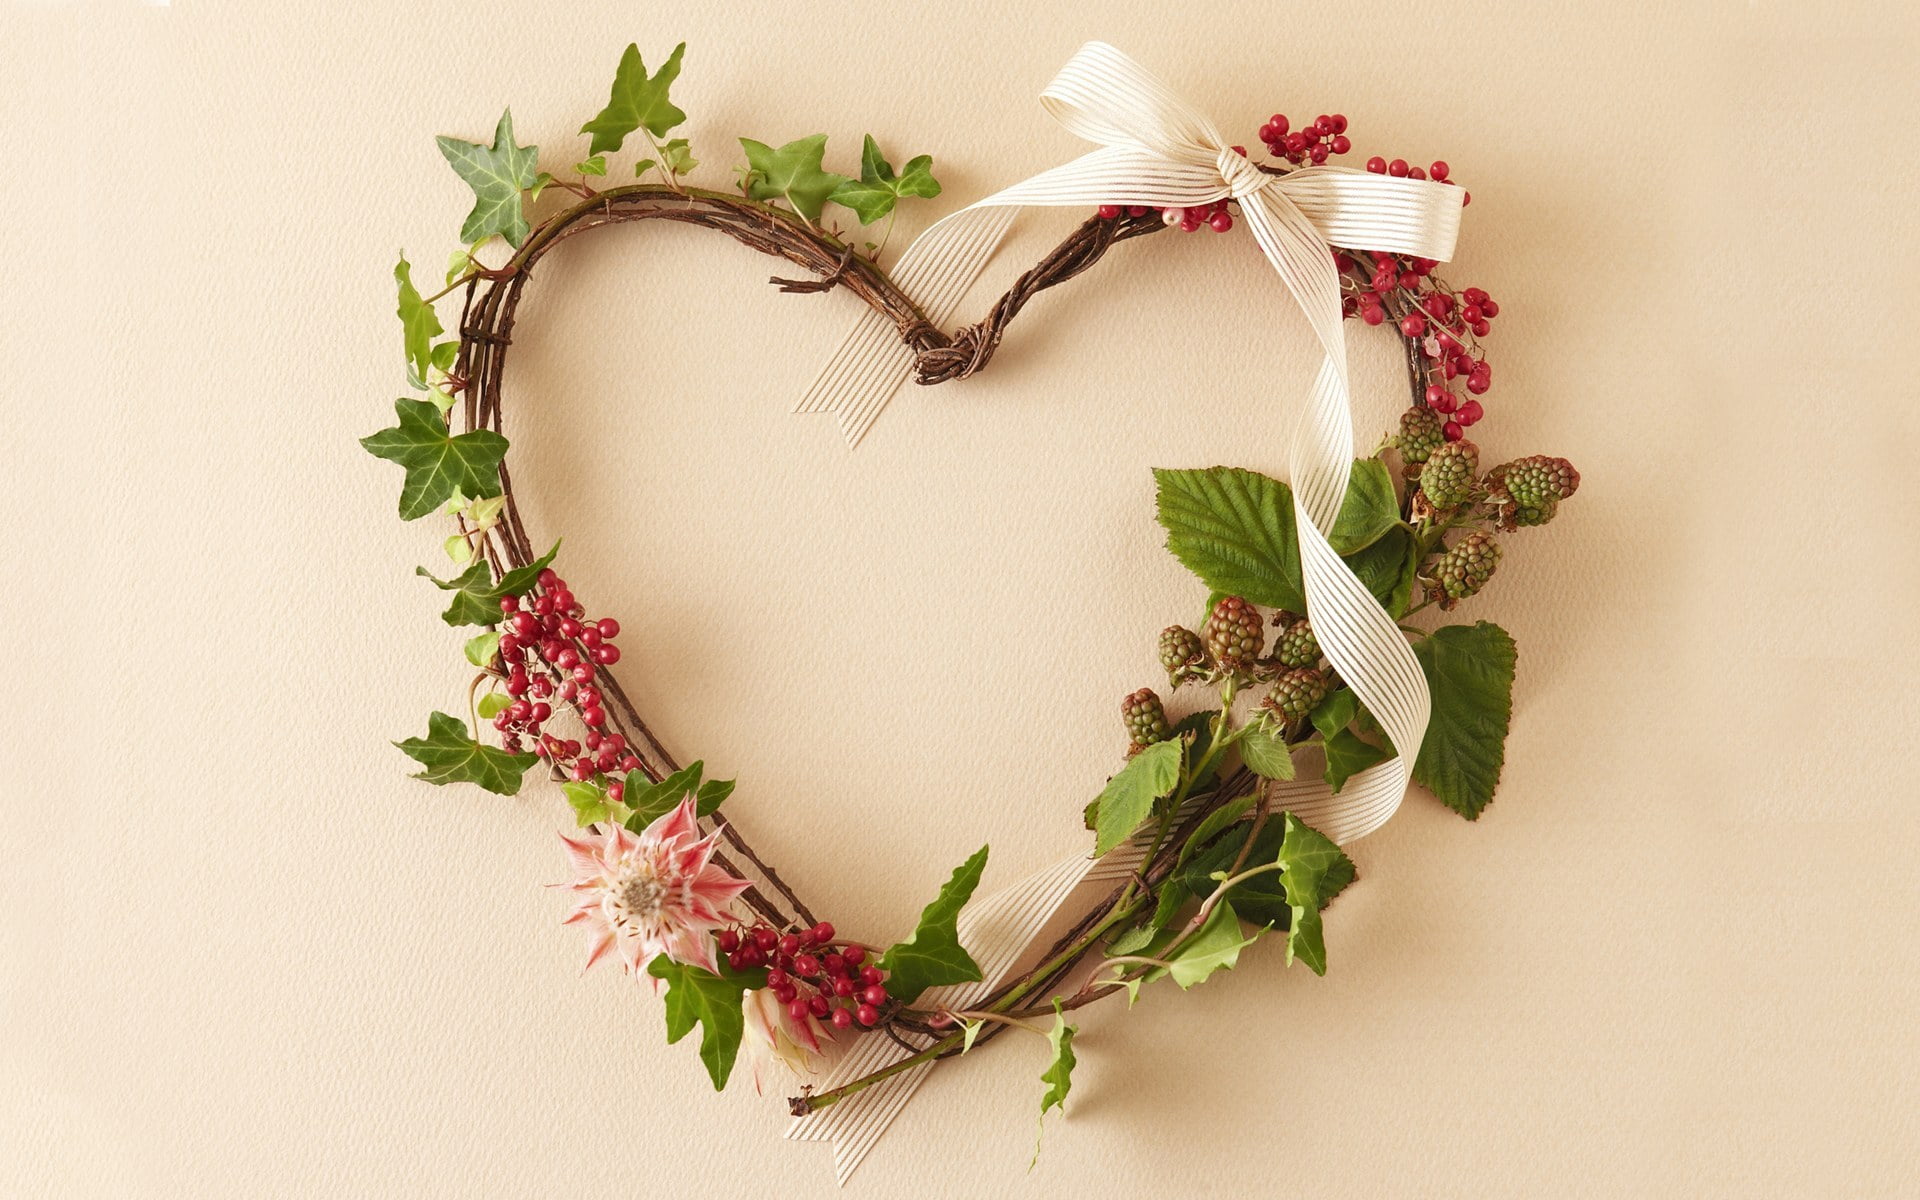 green and white floral heart-shaped wreath hanged on wall